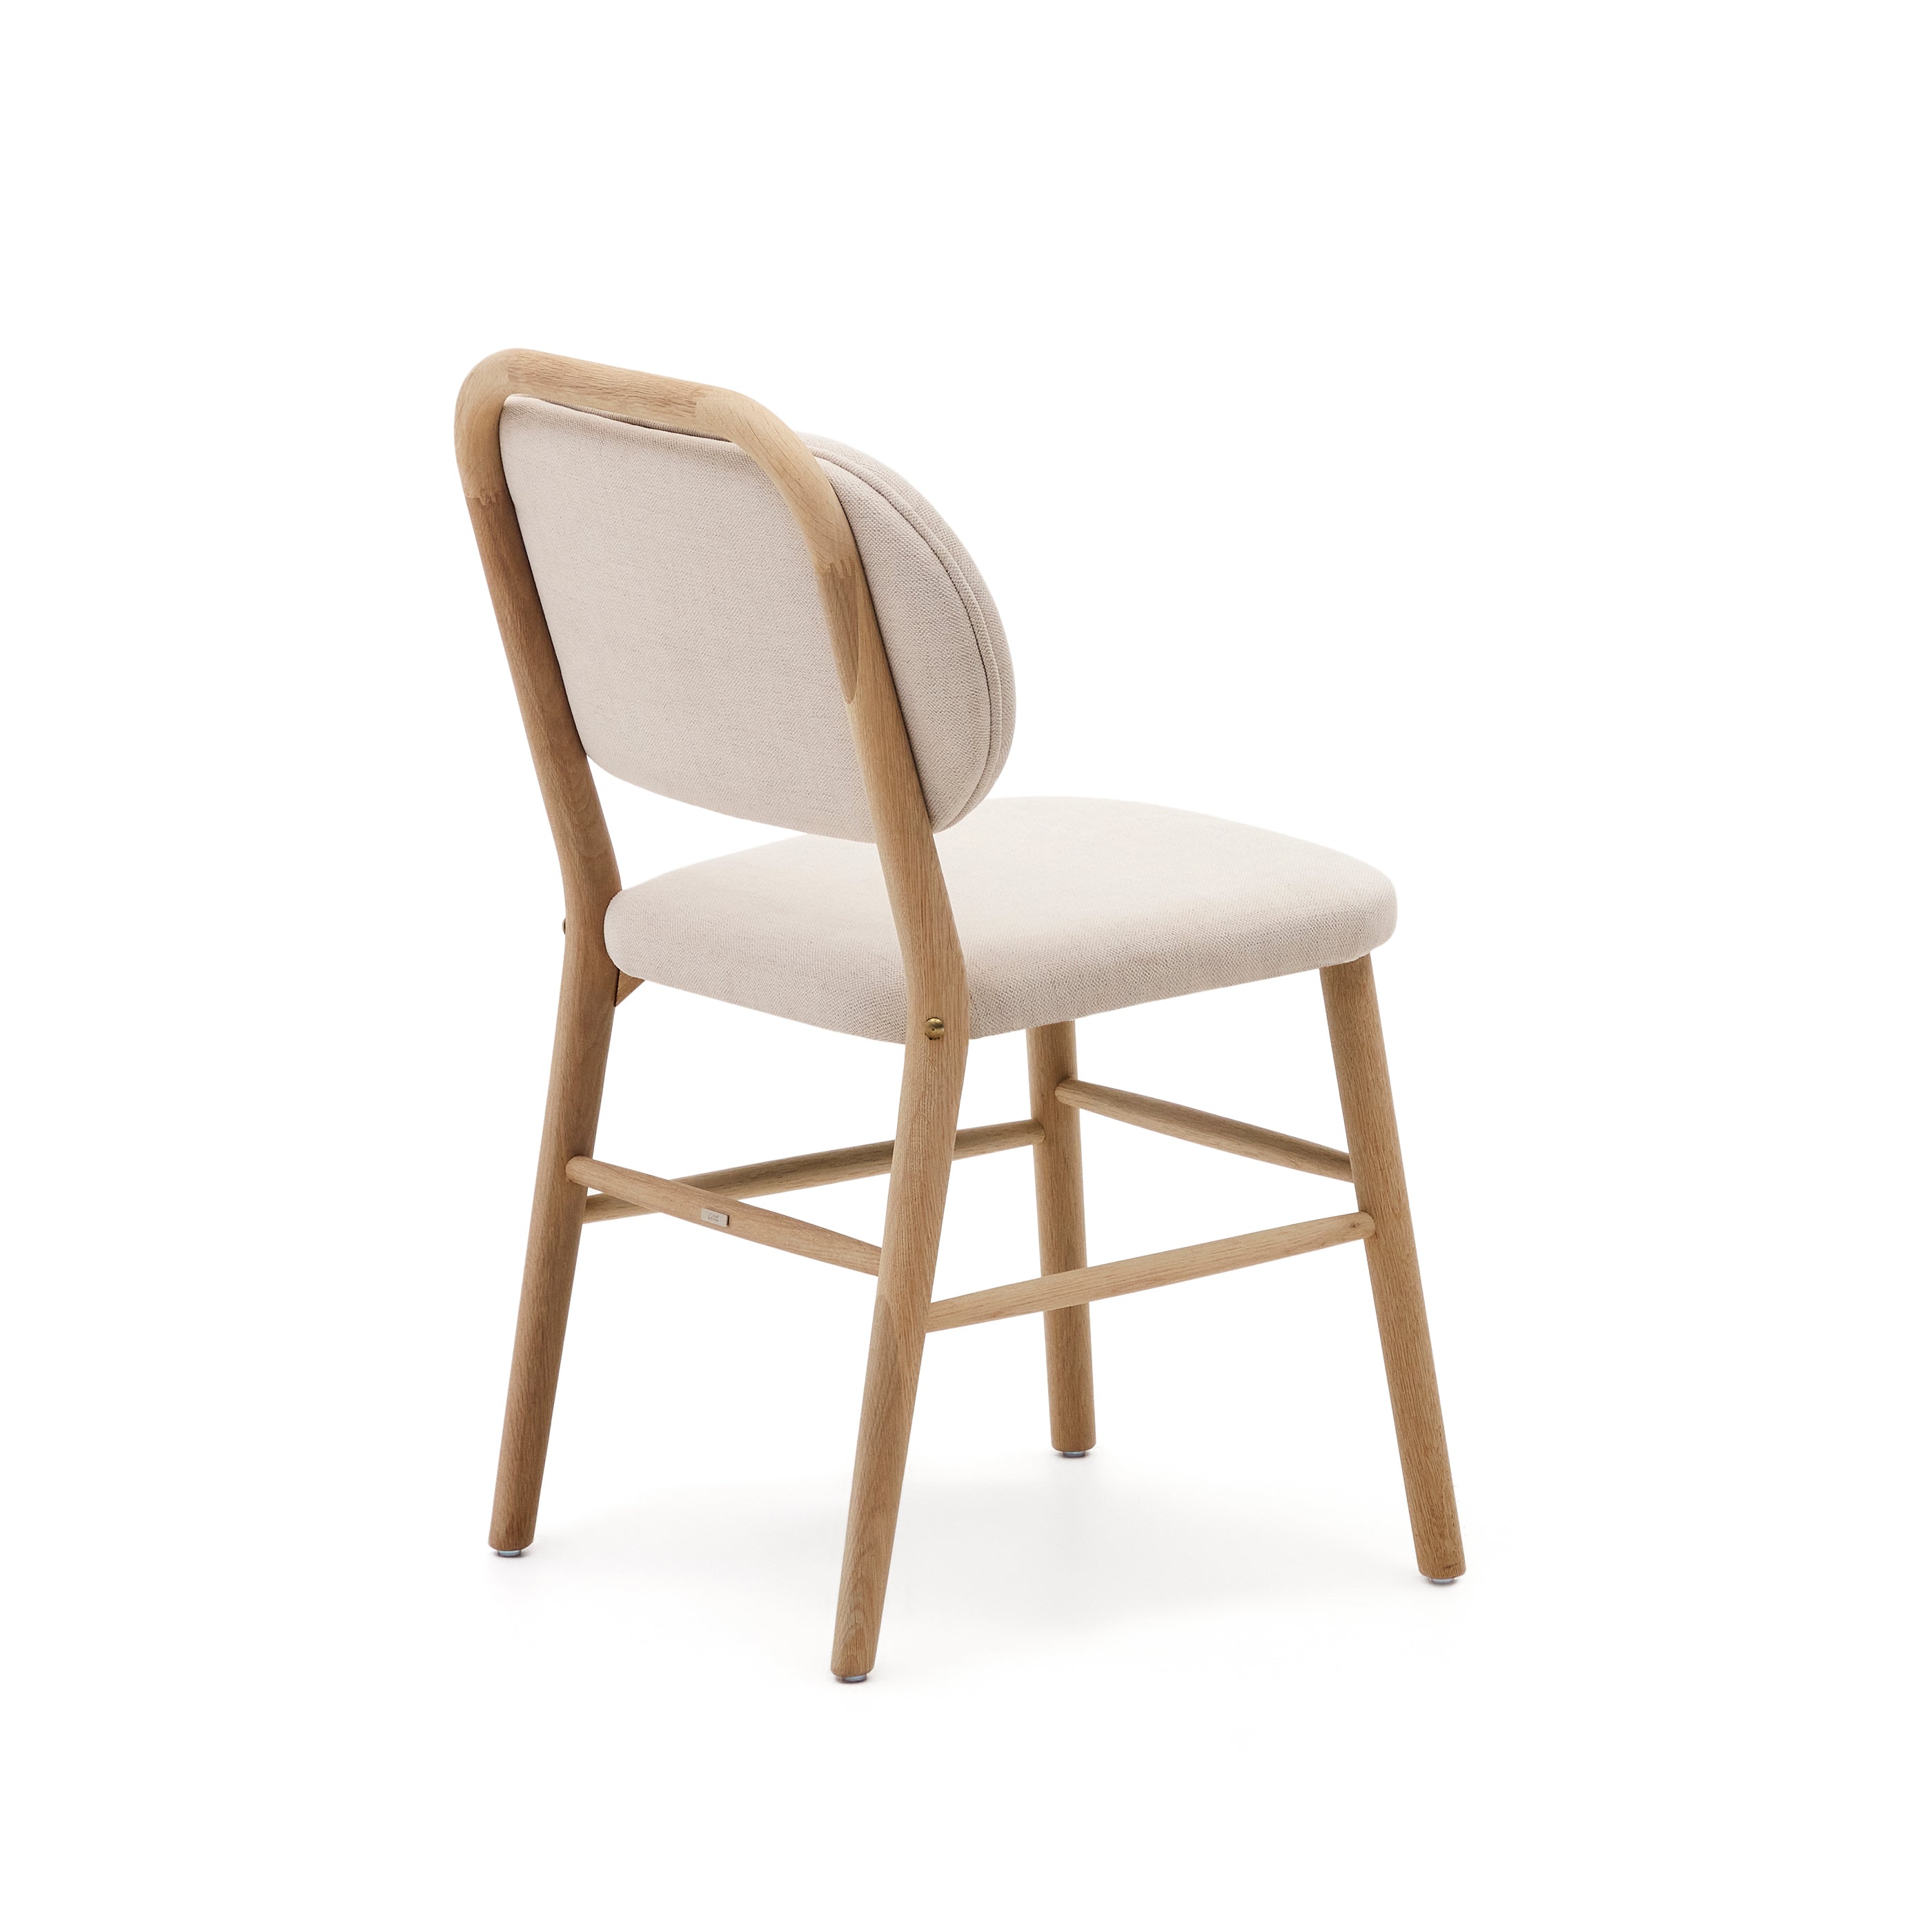 Helda chair in beige chenille and solid oak wood